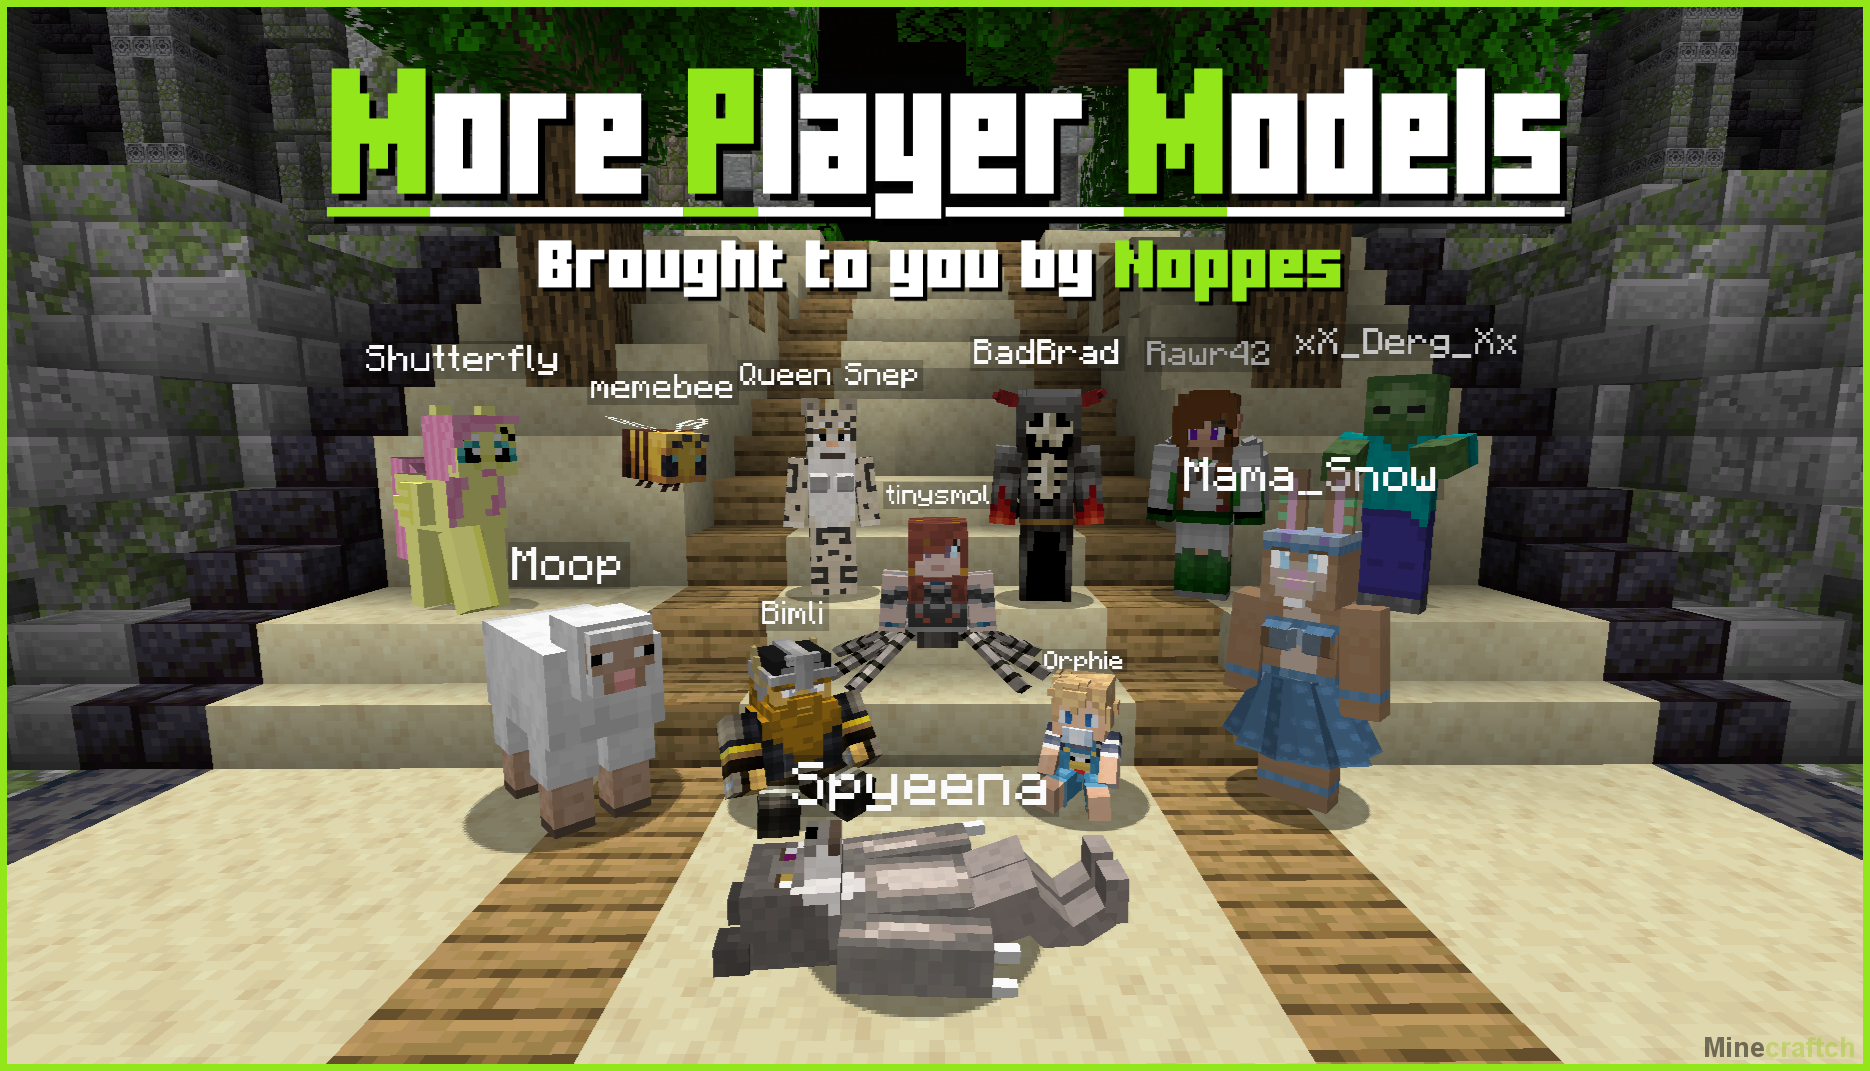 More players 1.16